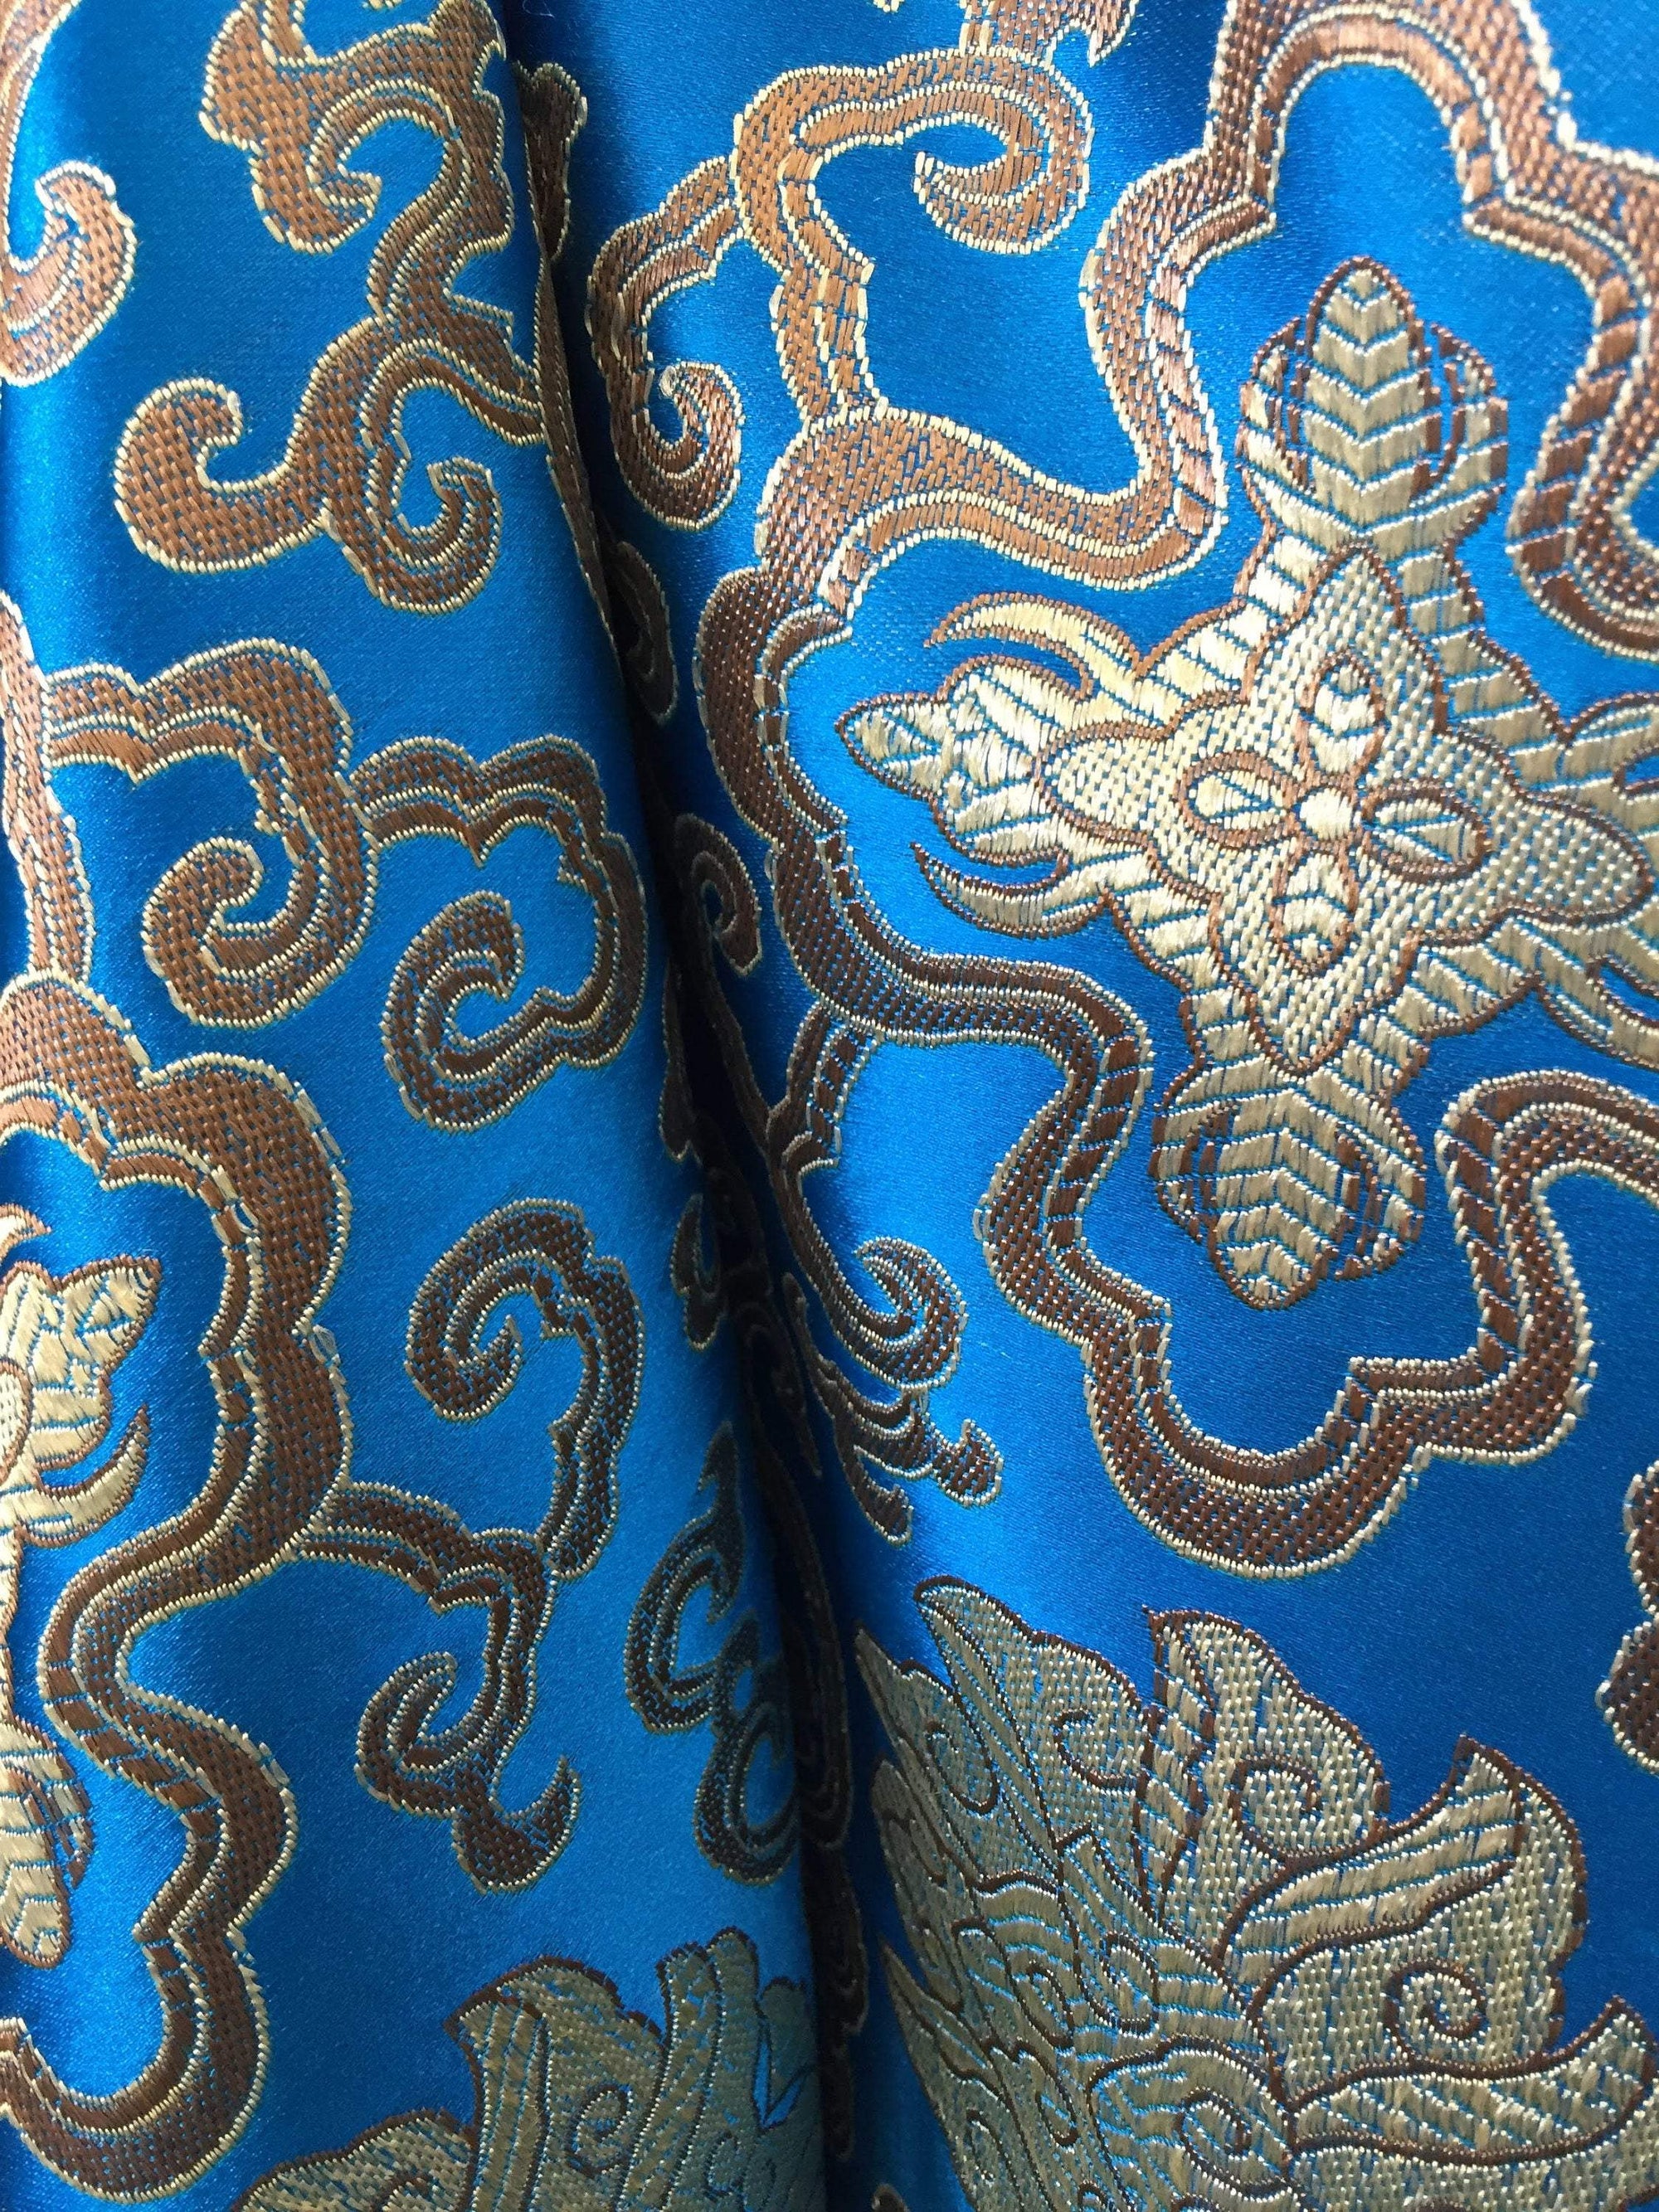 Adelaide TURQUOISE GOLD Chinese Brocade Satin Fabric by the Yard - 10058